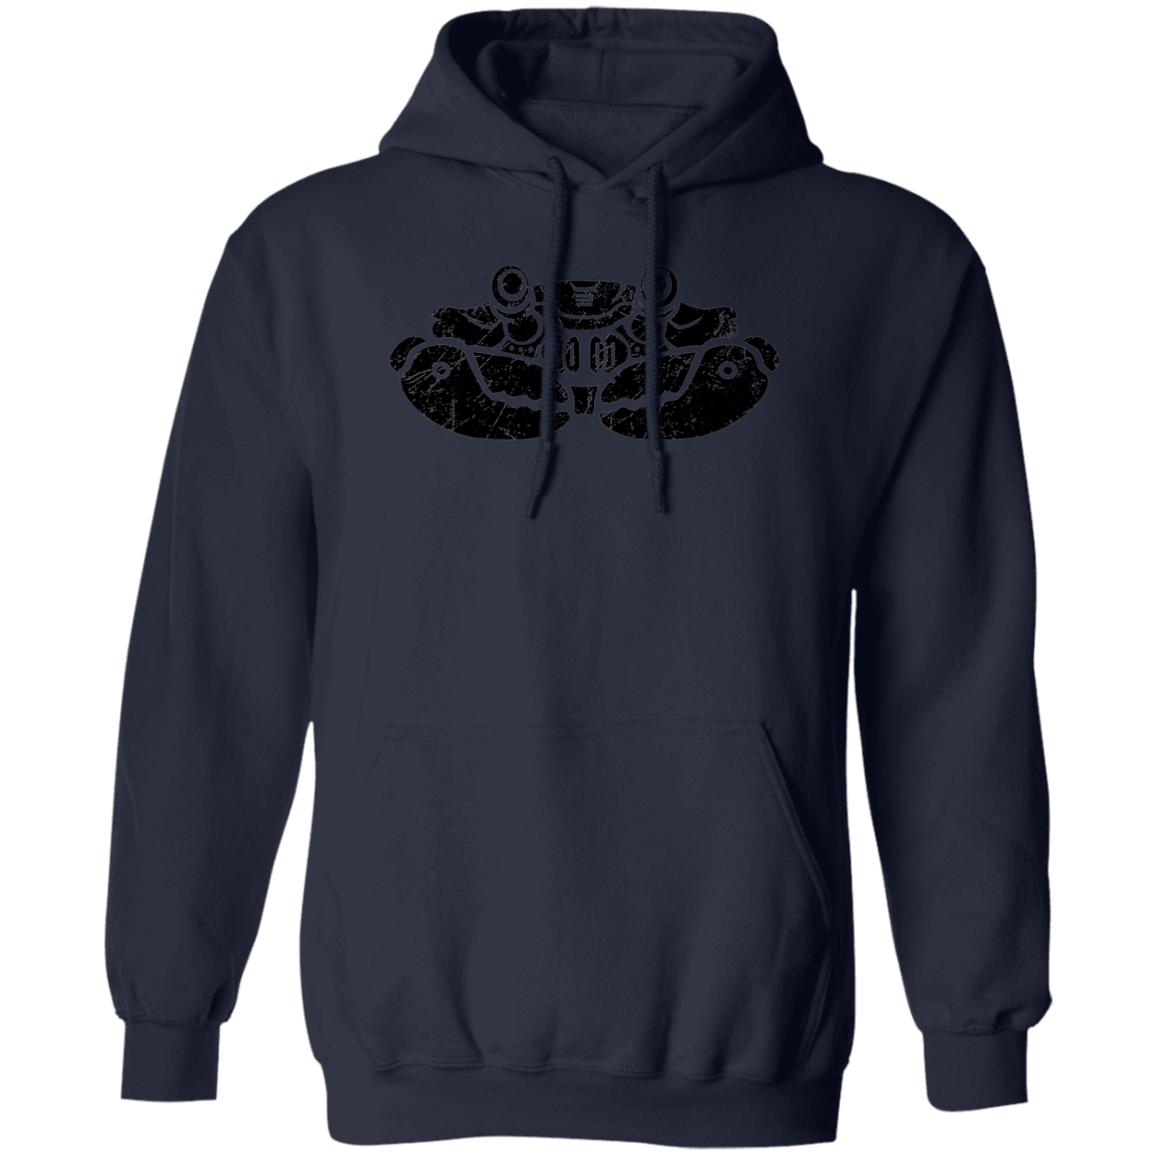 Black Distressed Emblem Hoodies for Adults (Crab/Clamps)